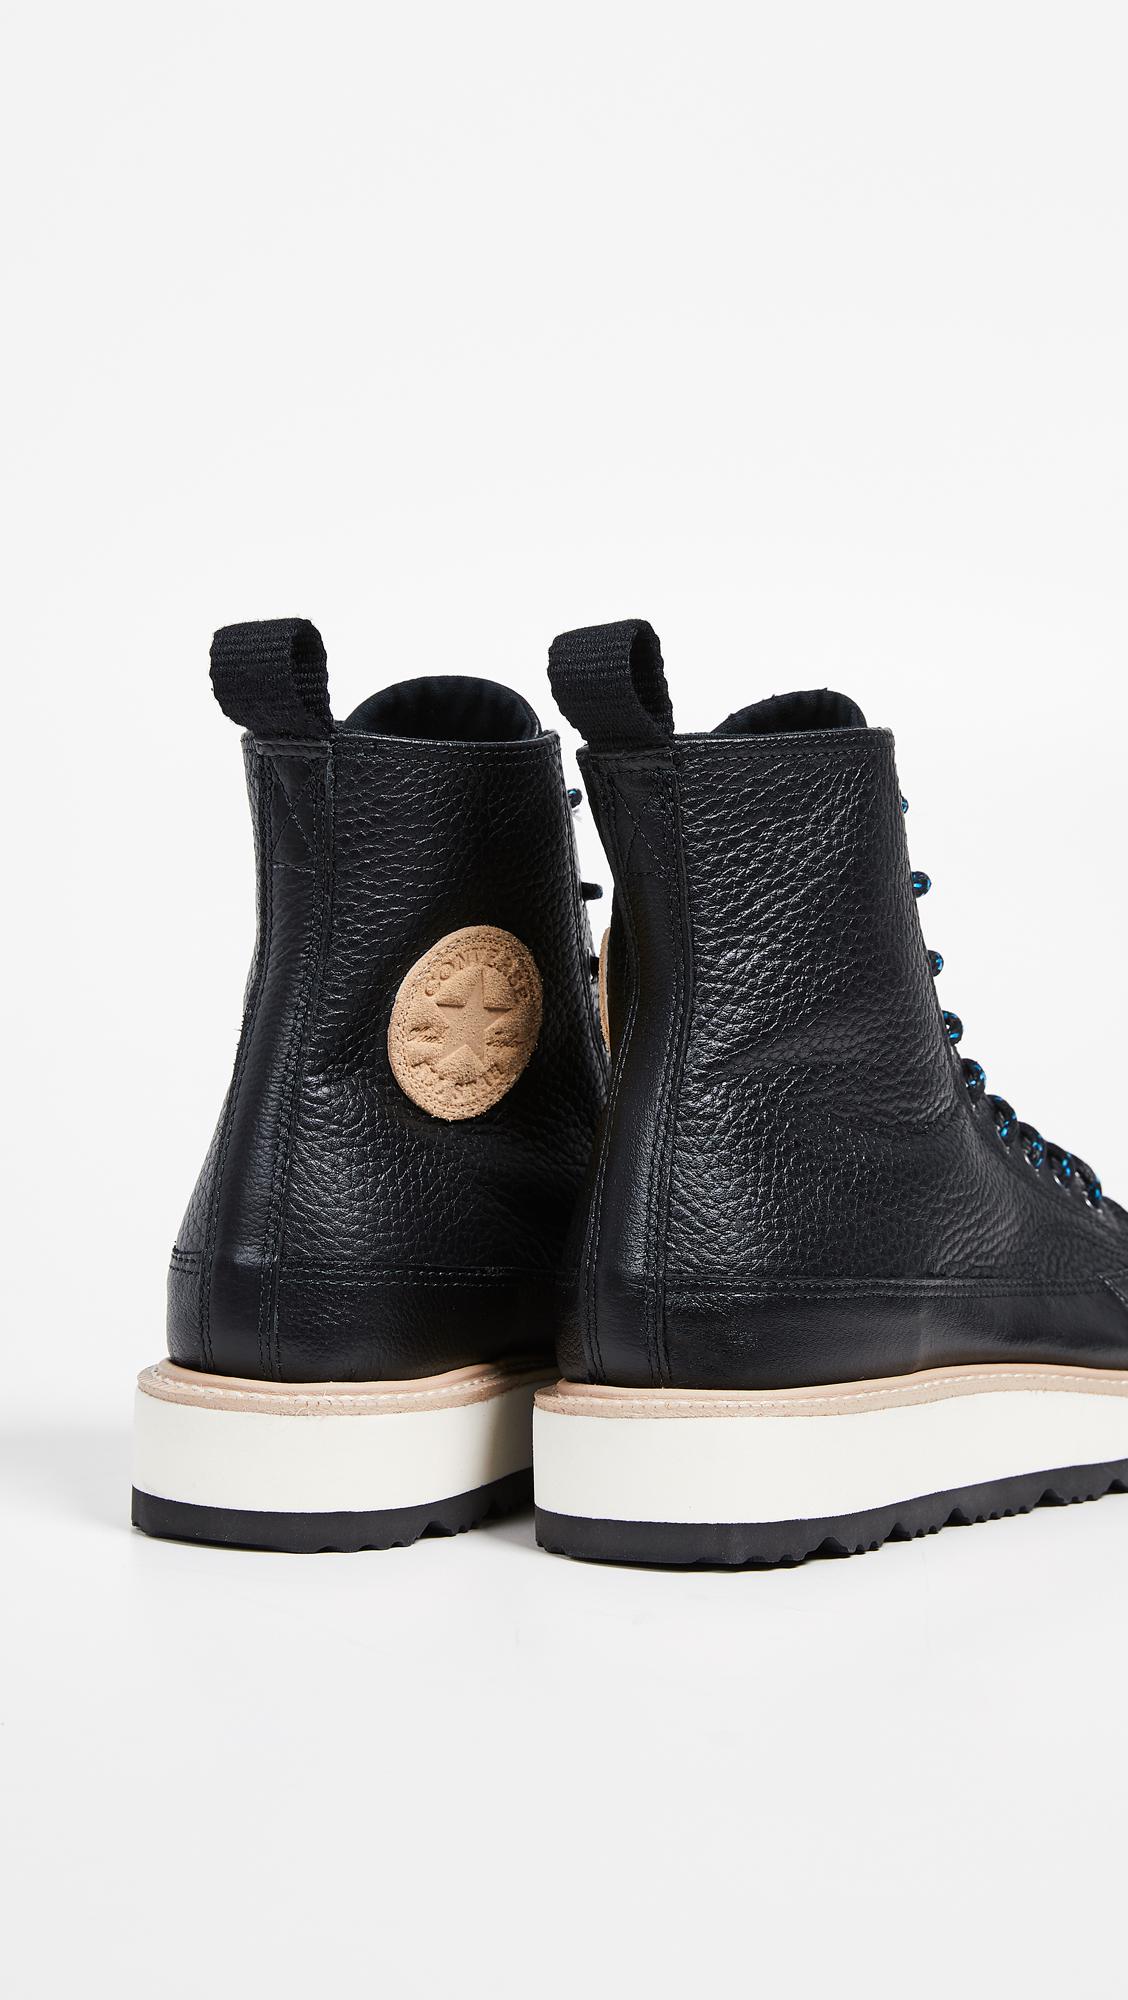 converse chuck taylor all star crafted high top boot